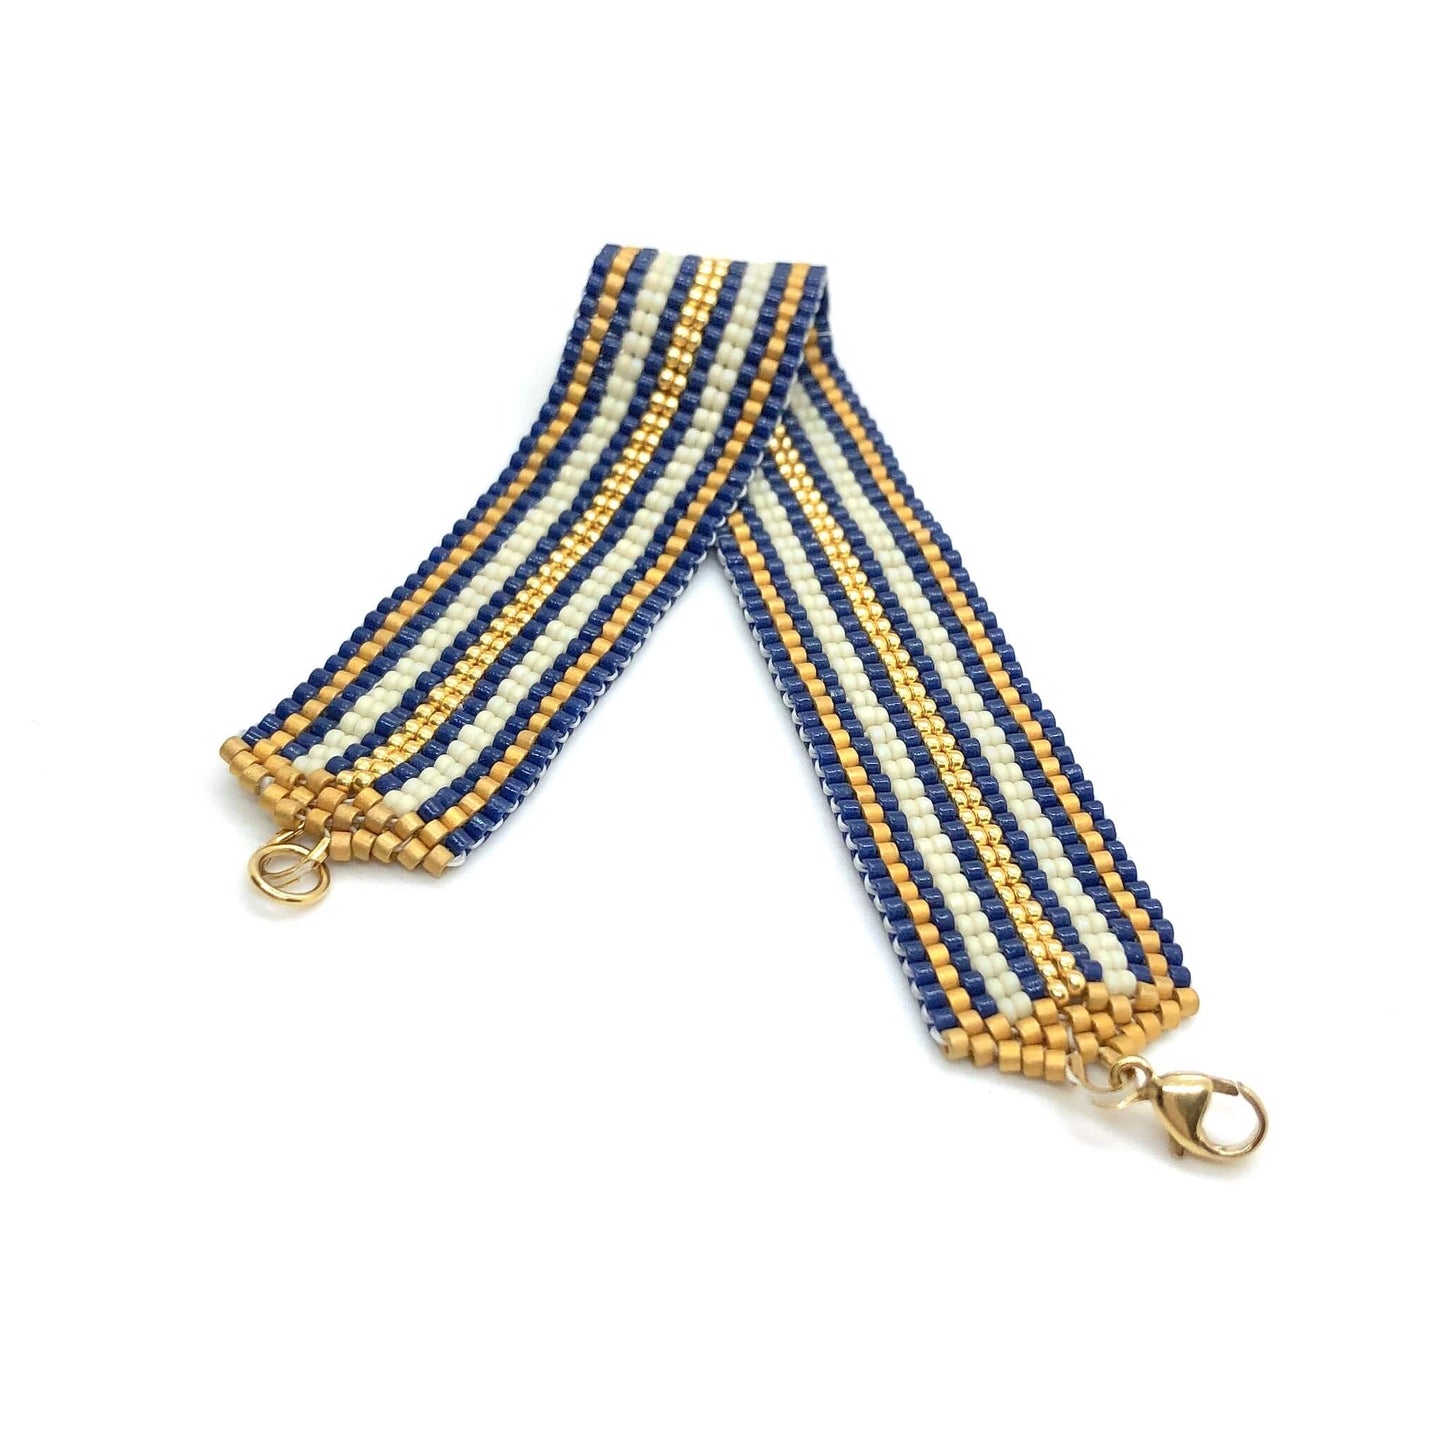 Modern and stylish nautical beaded bracelet cuff with horizontal stripes in navy, ivory, and gold seed beads.